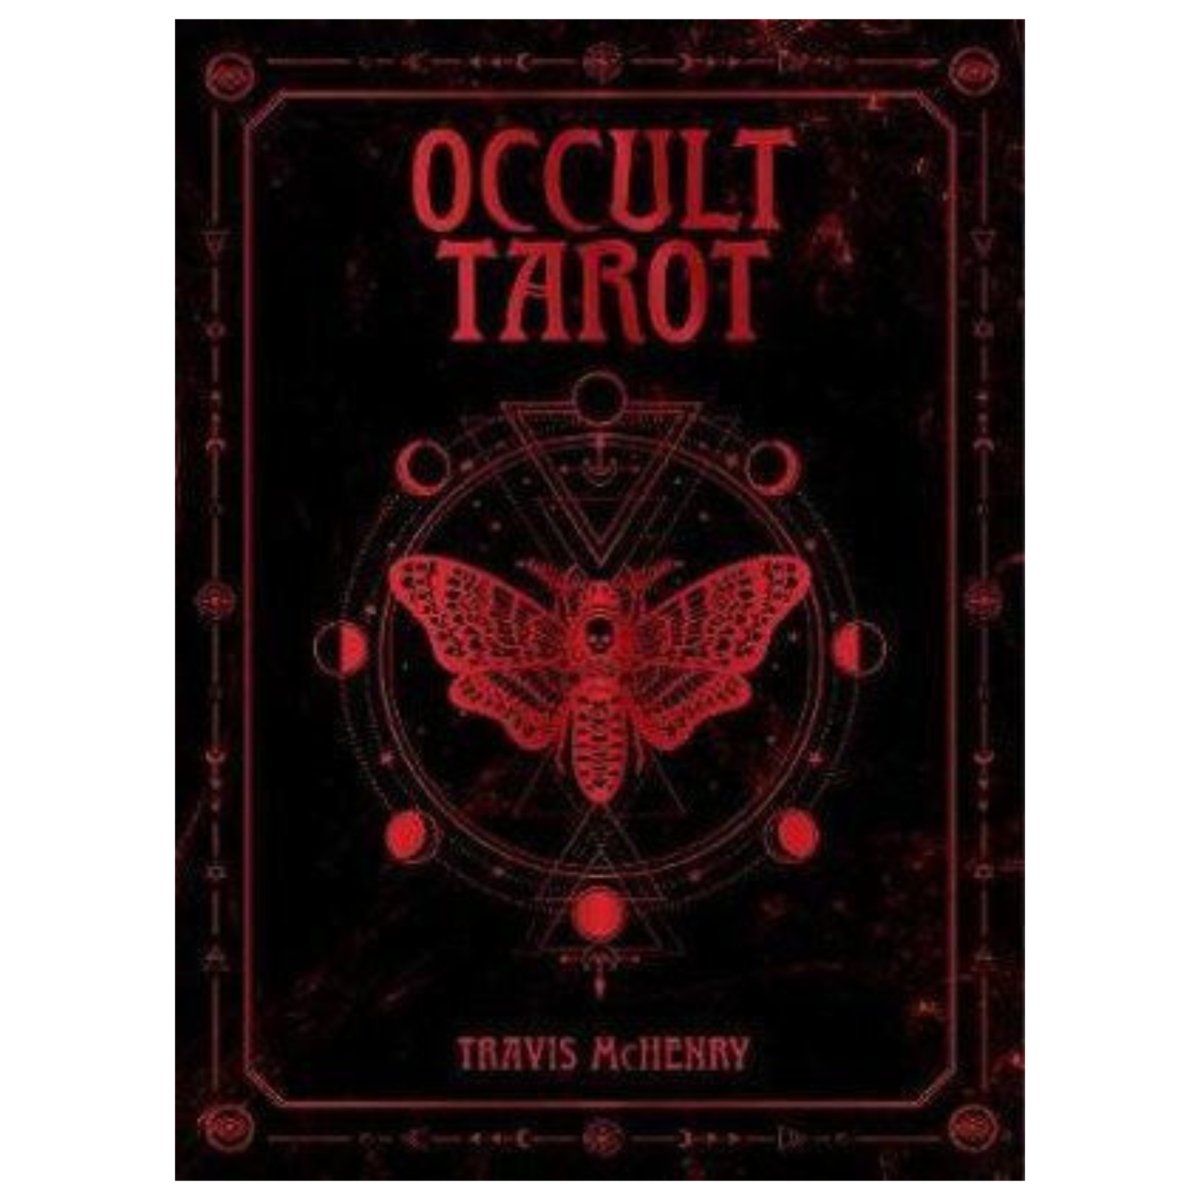 Occult Tarot - Travis McHenry - Astrology House